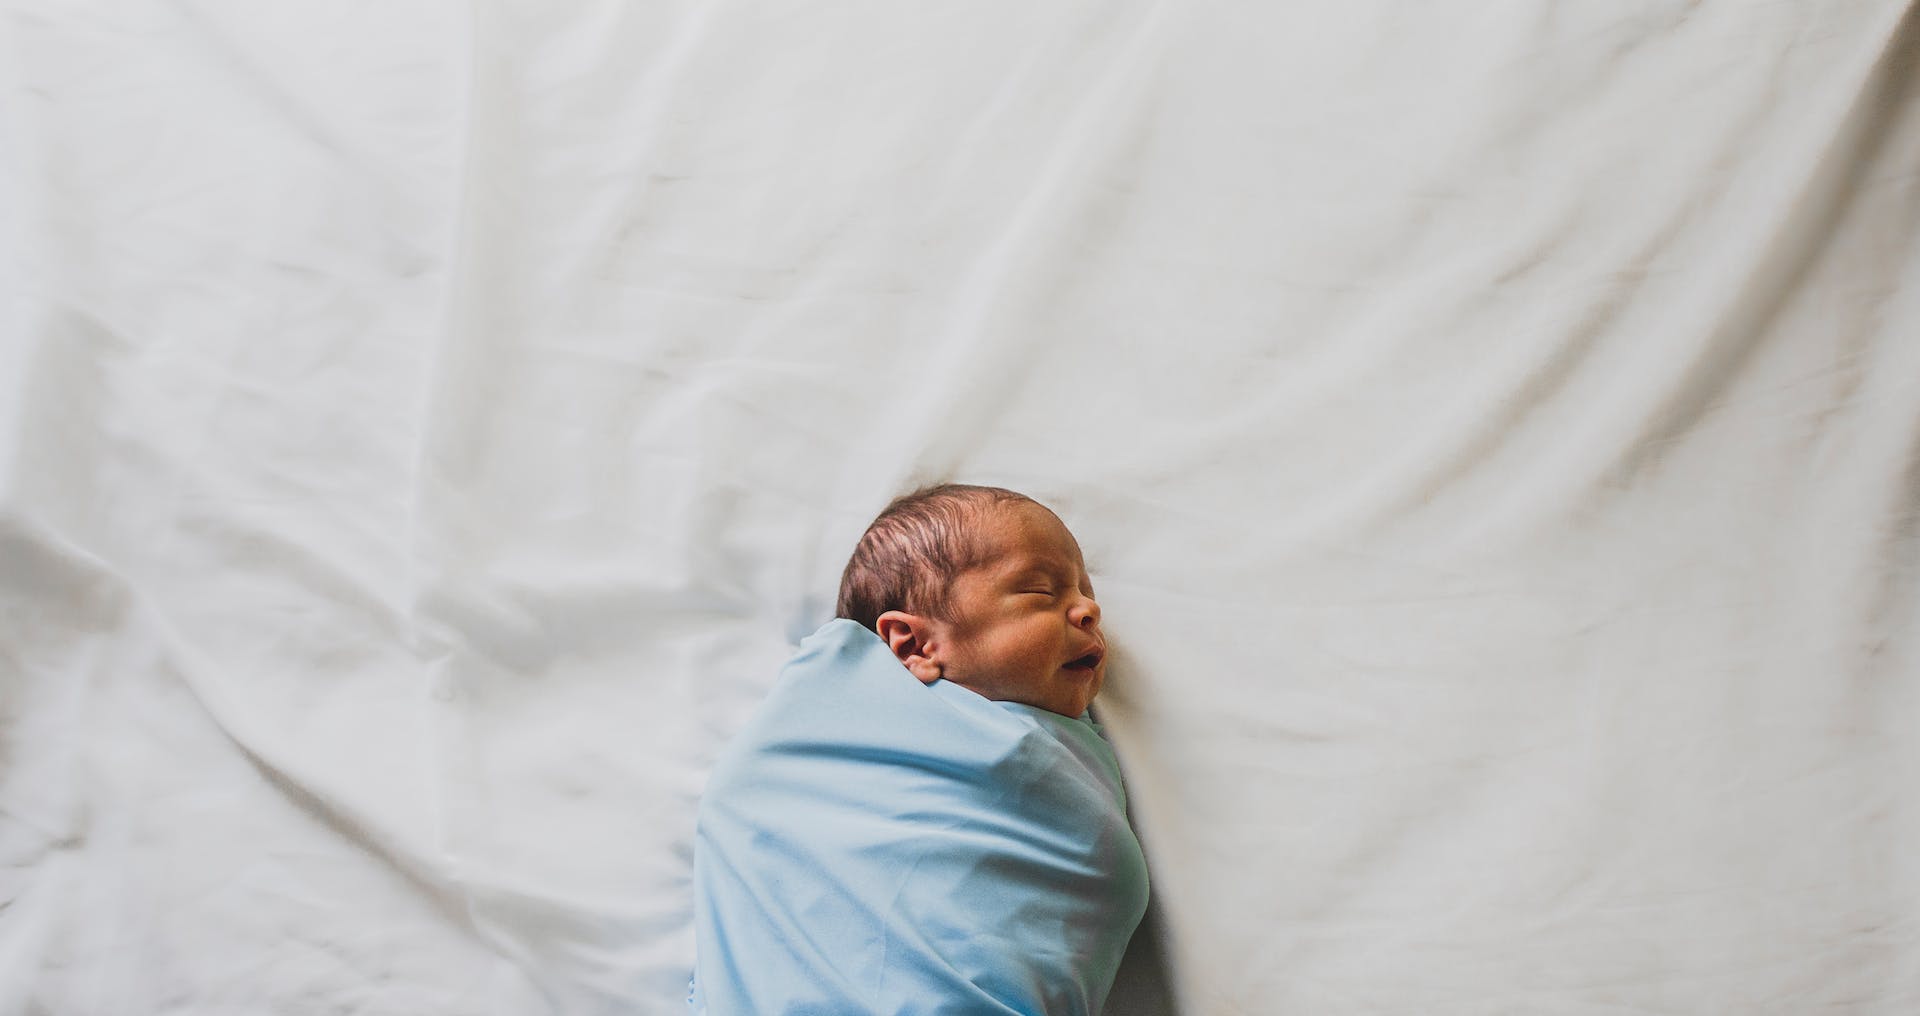 Newborn baby boy wrapped in a blue blanket | Source: Pexels